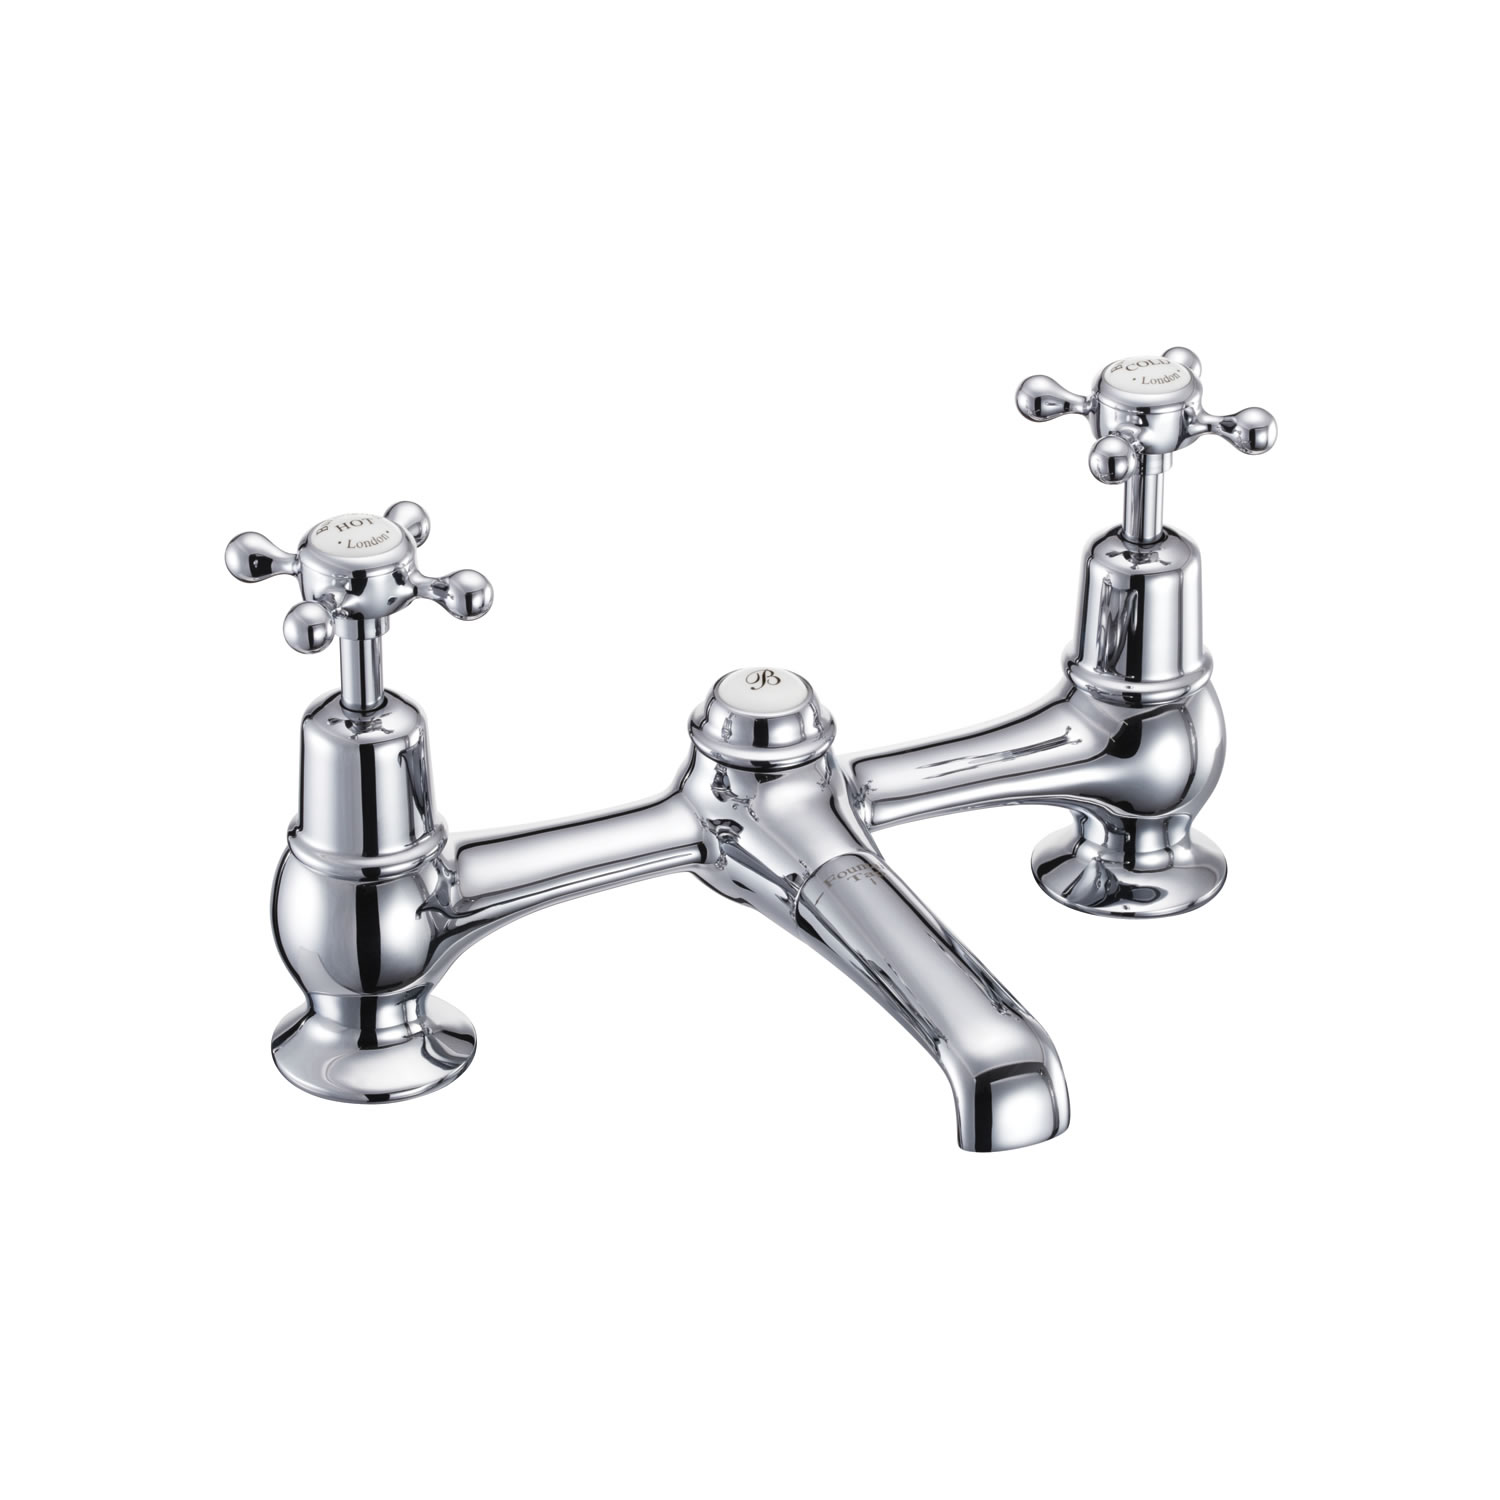 Burlington bridge basin mixer with low central indice & plug and chain waste with swivel spout